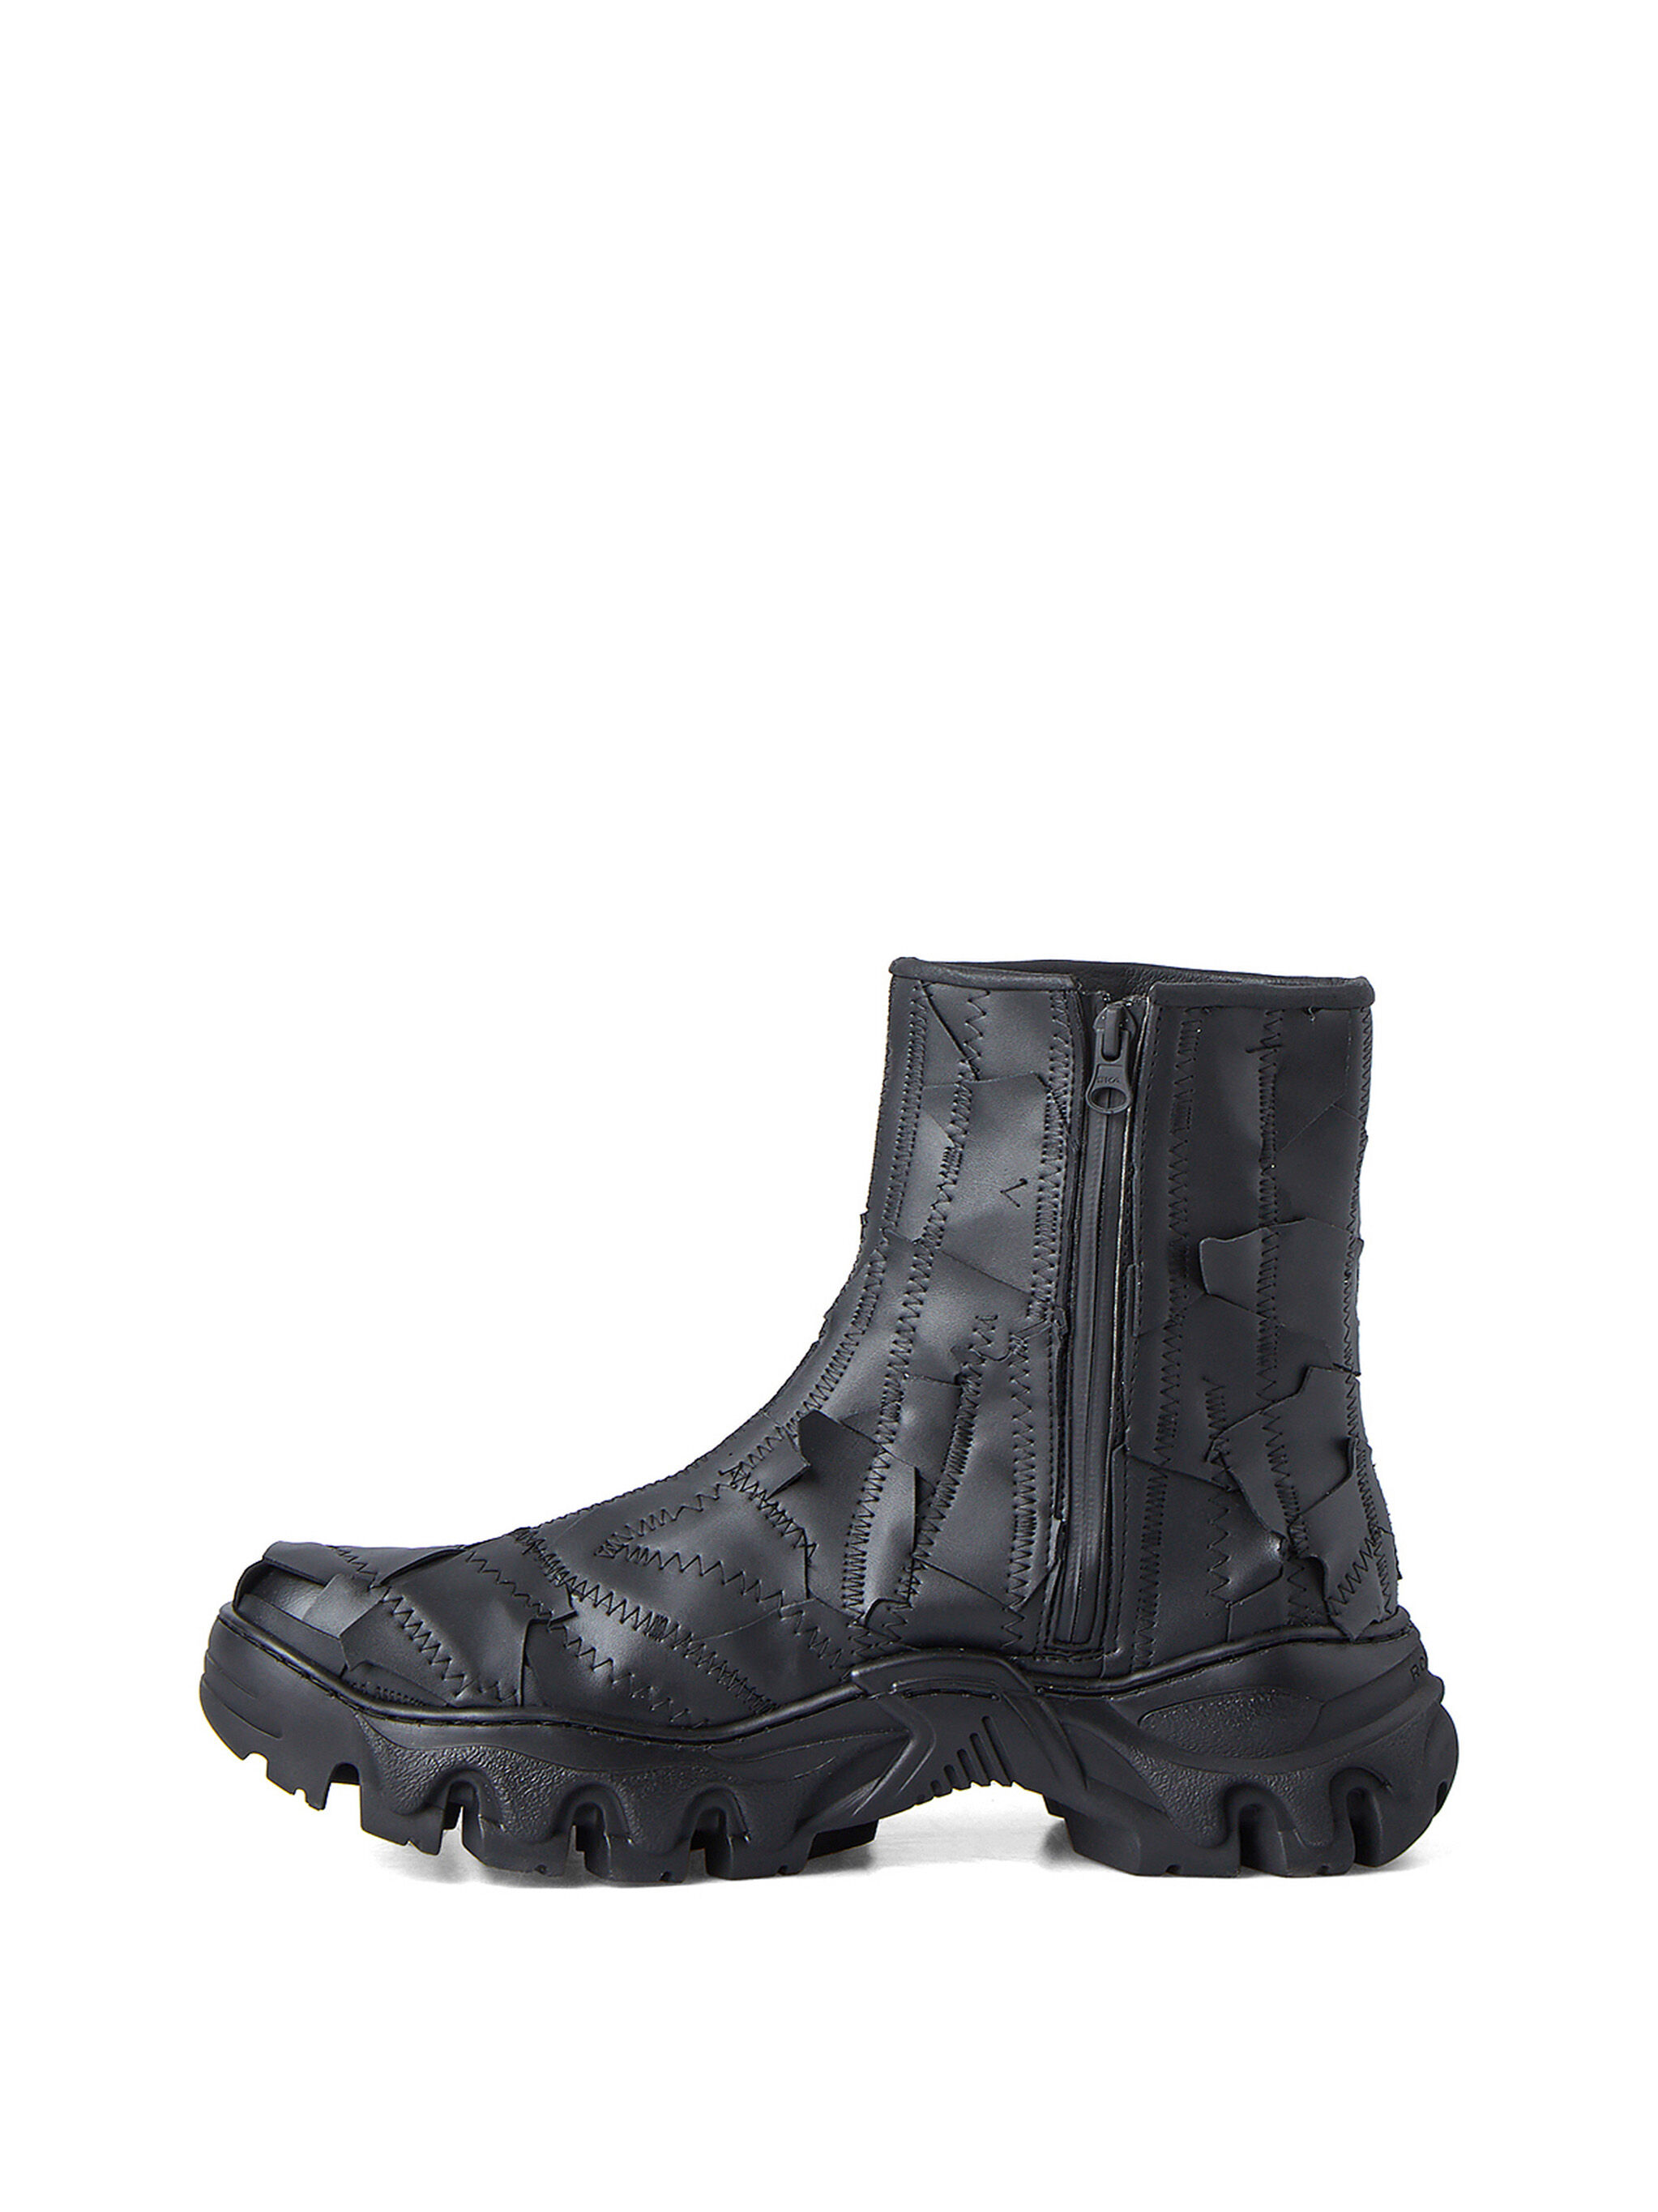 Rombaut Upcycled Boccaccio Boots in Vegan Leather | THE FLAMEL®